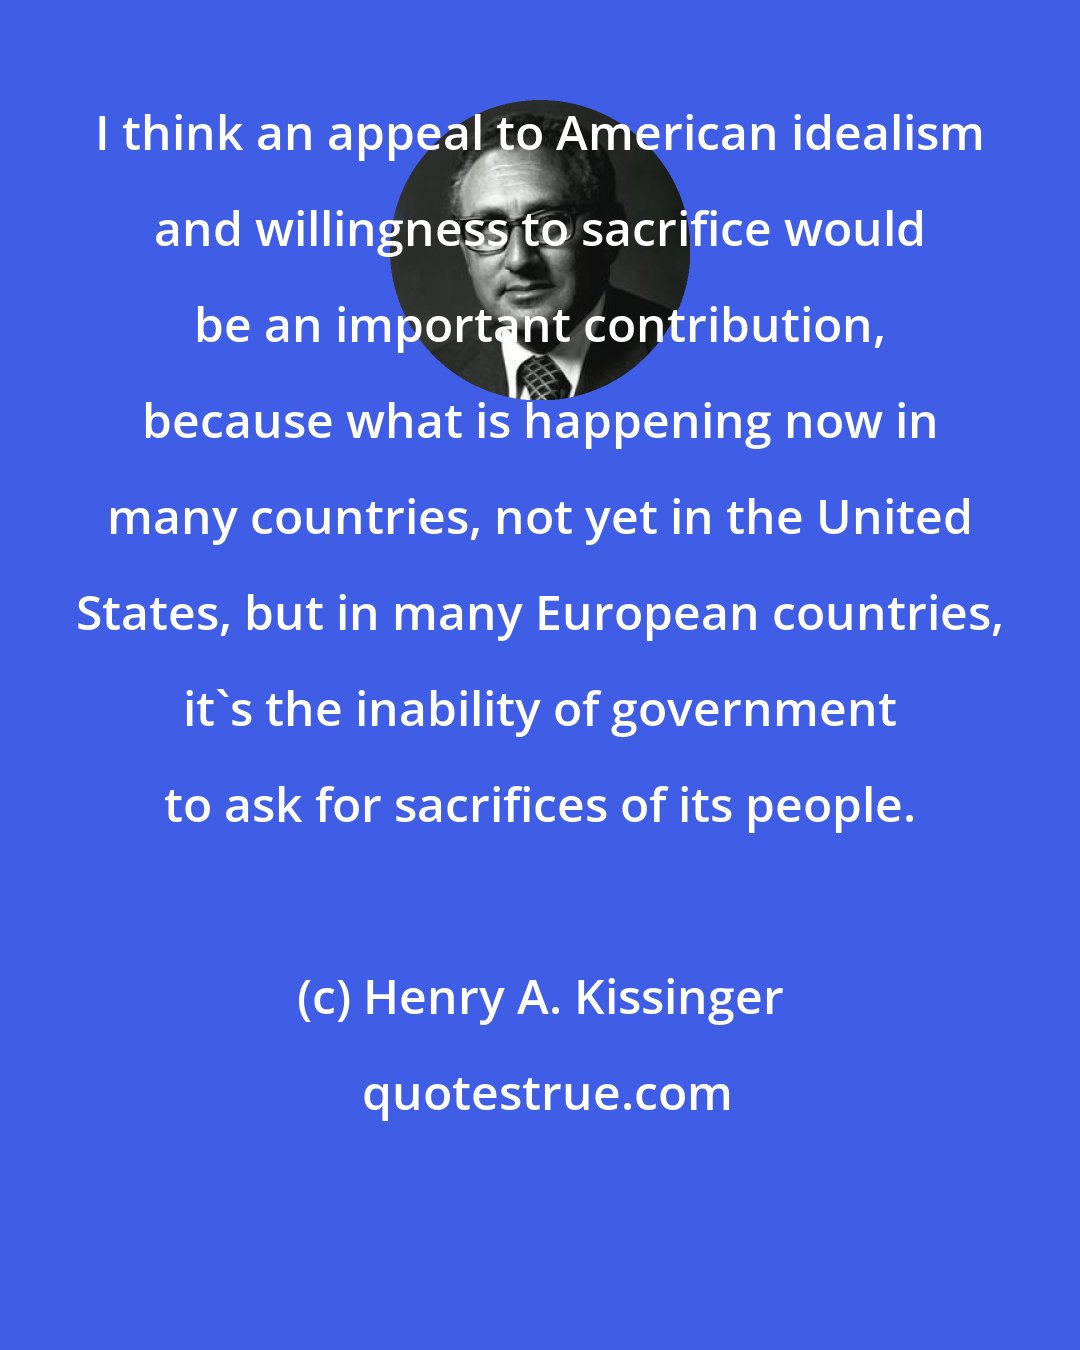 Henry A. Kissinger: I think an appeal to American idealism and willingness to sacrifice would be an important contribution, because what is happening now in many countries, not yet in the United States, but in many European countries, it's the inability of government to ask for sacrifices of its people.